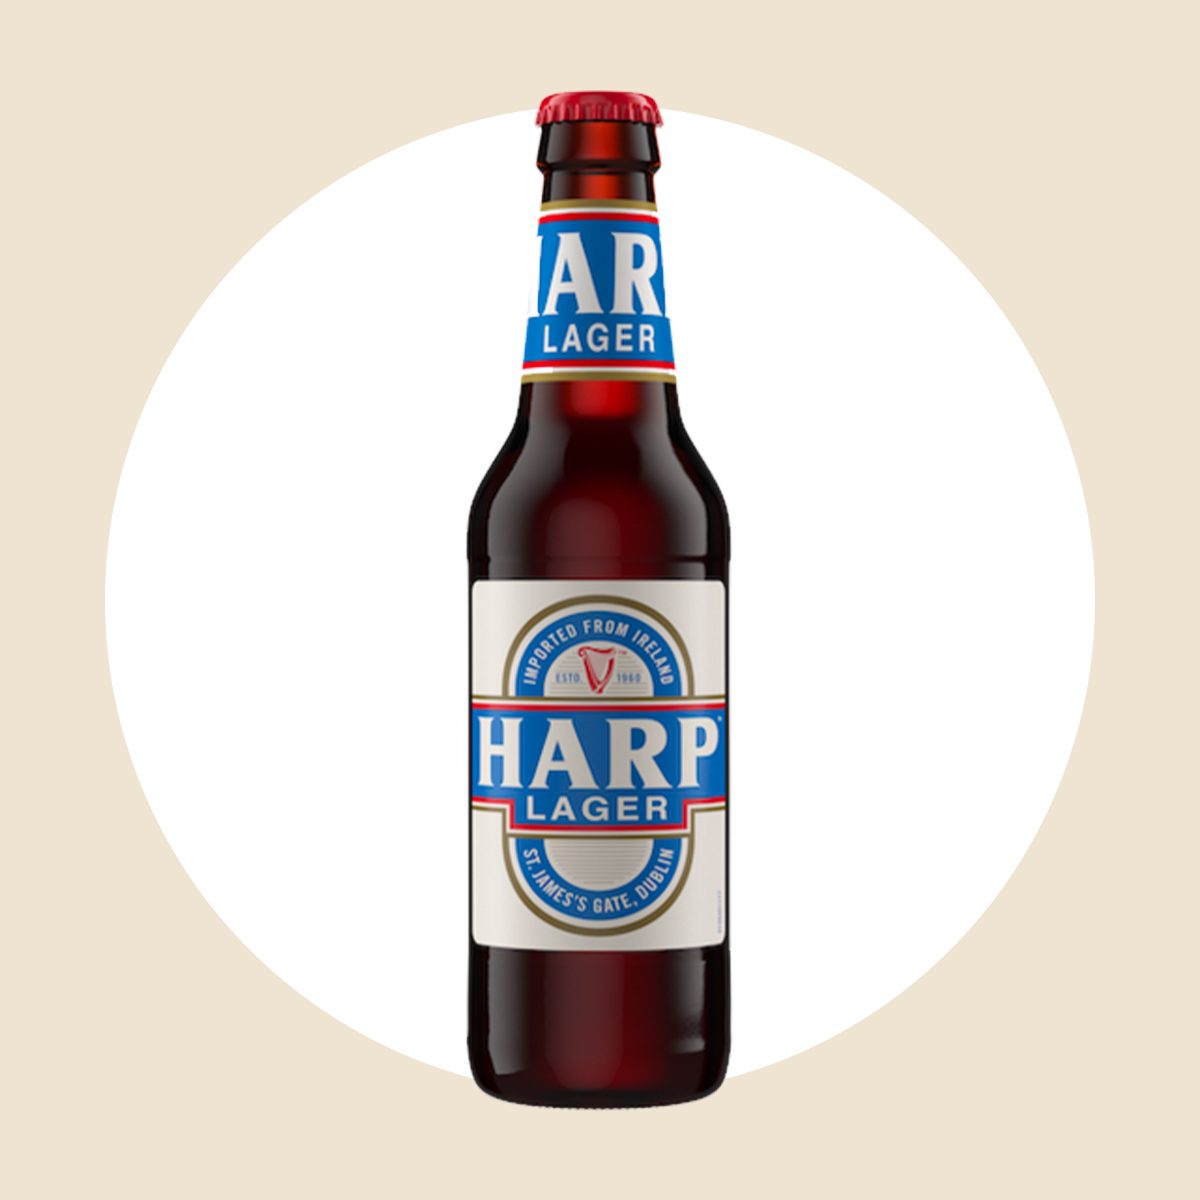 Harp Lager Ecomm Via Drizly